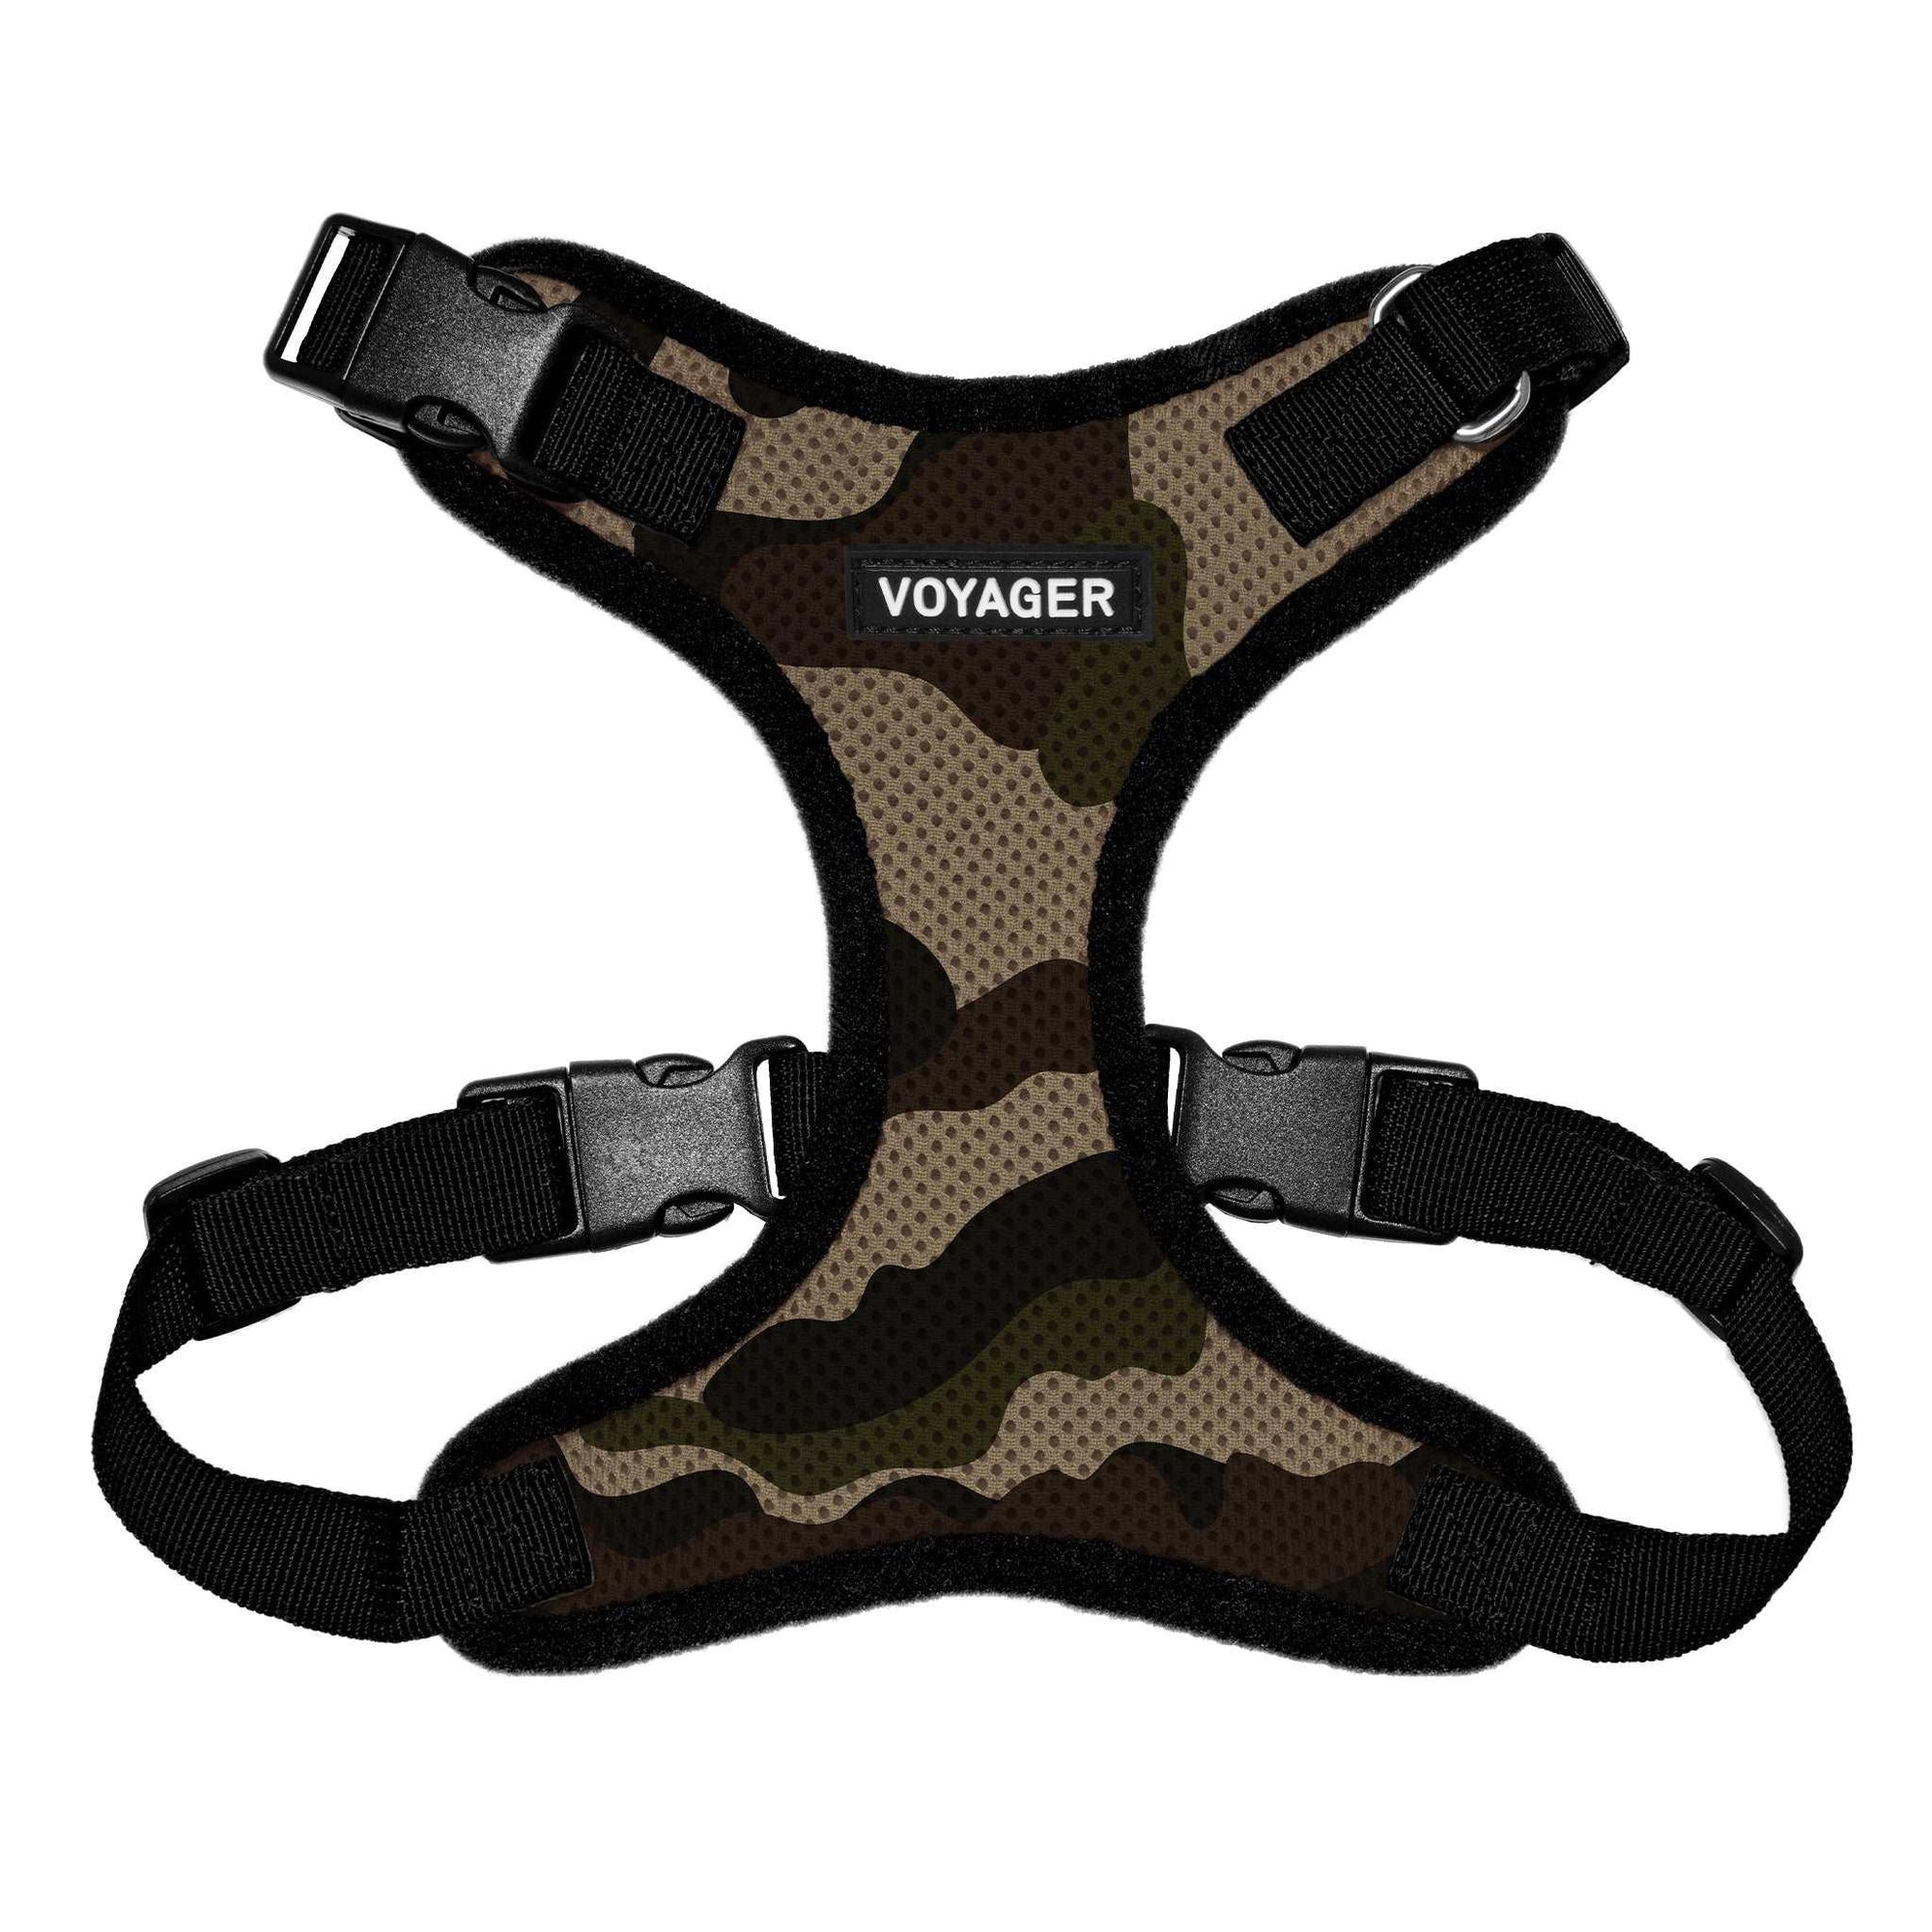 VOYAGER Step-In Lock Dog Harness in Camo with Black Trim and Webbing - Front